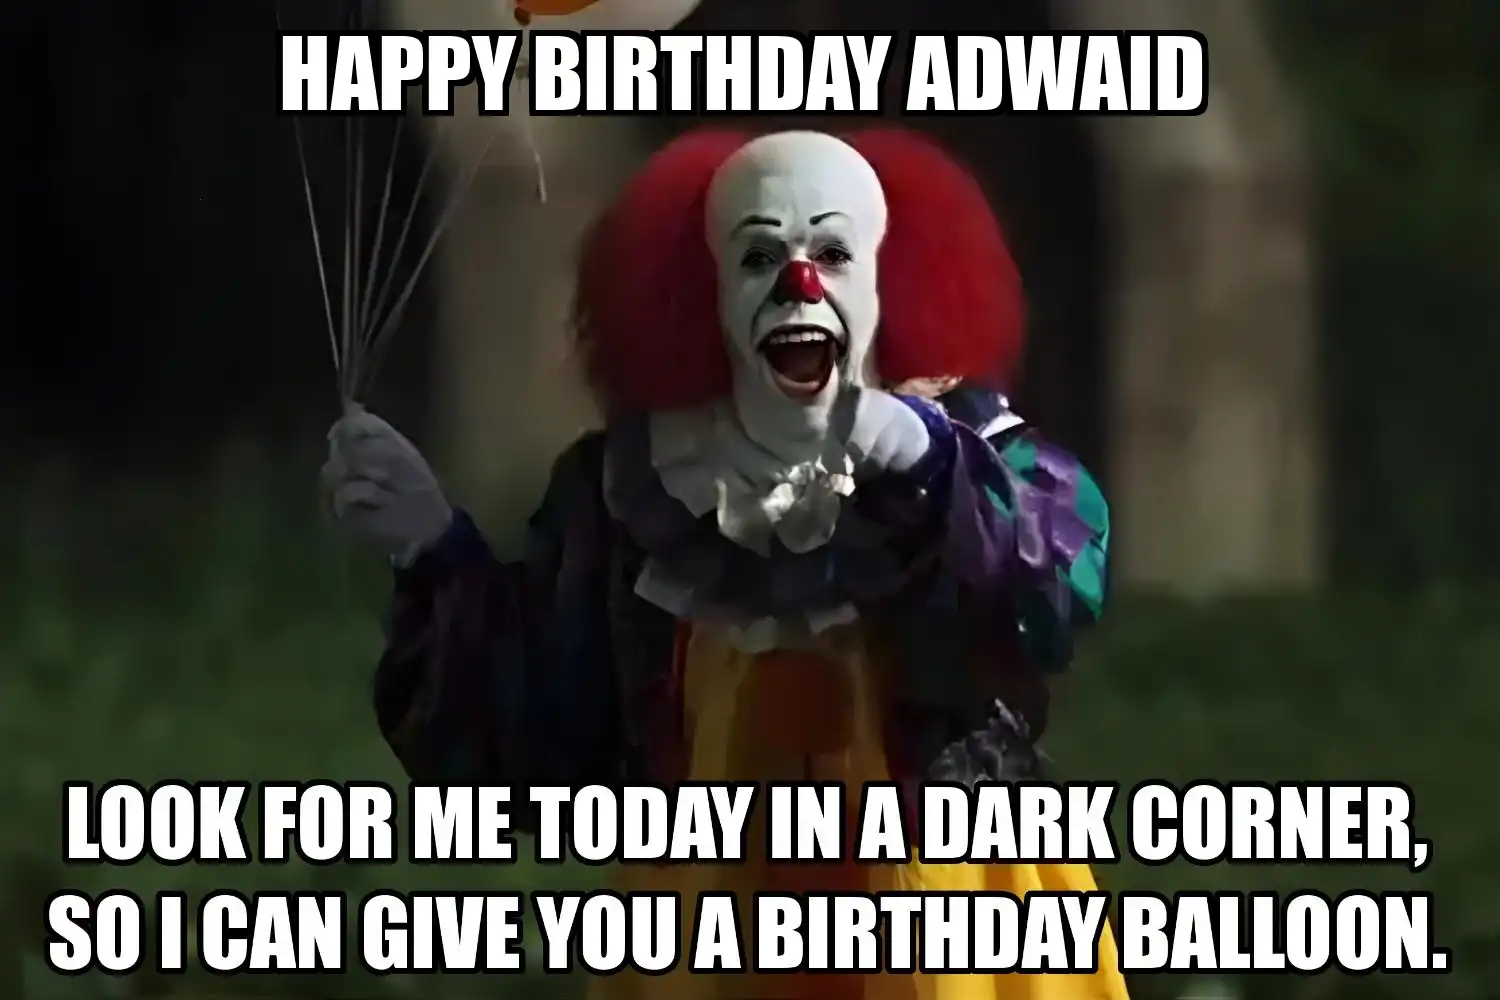 Happy Birthday Adwaid I Can Give You A Balloon Meme